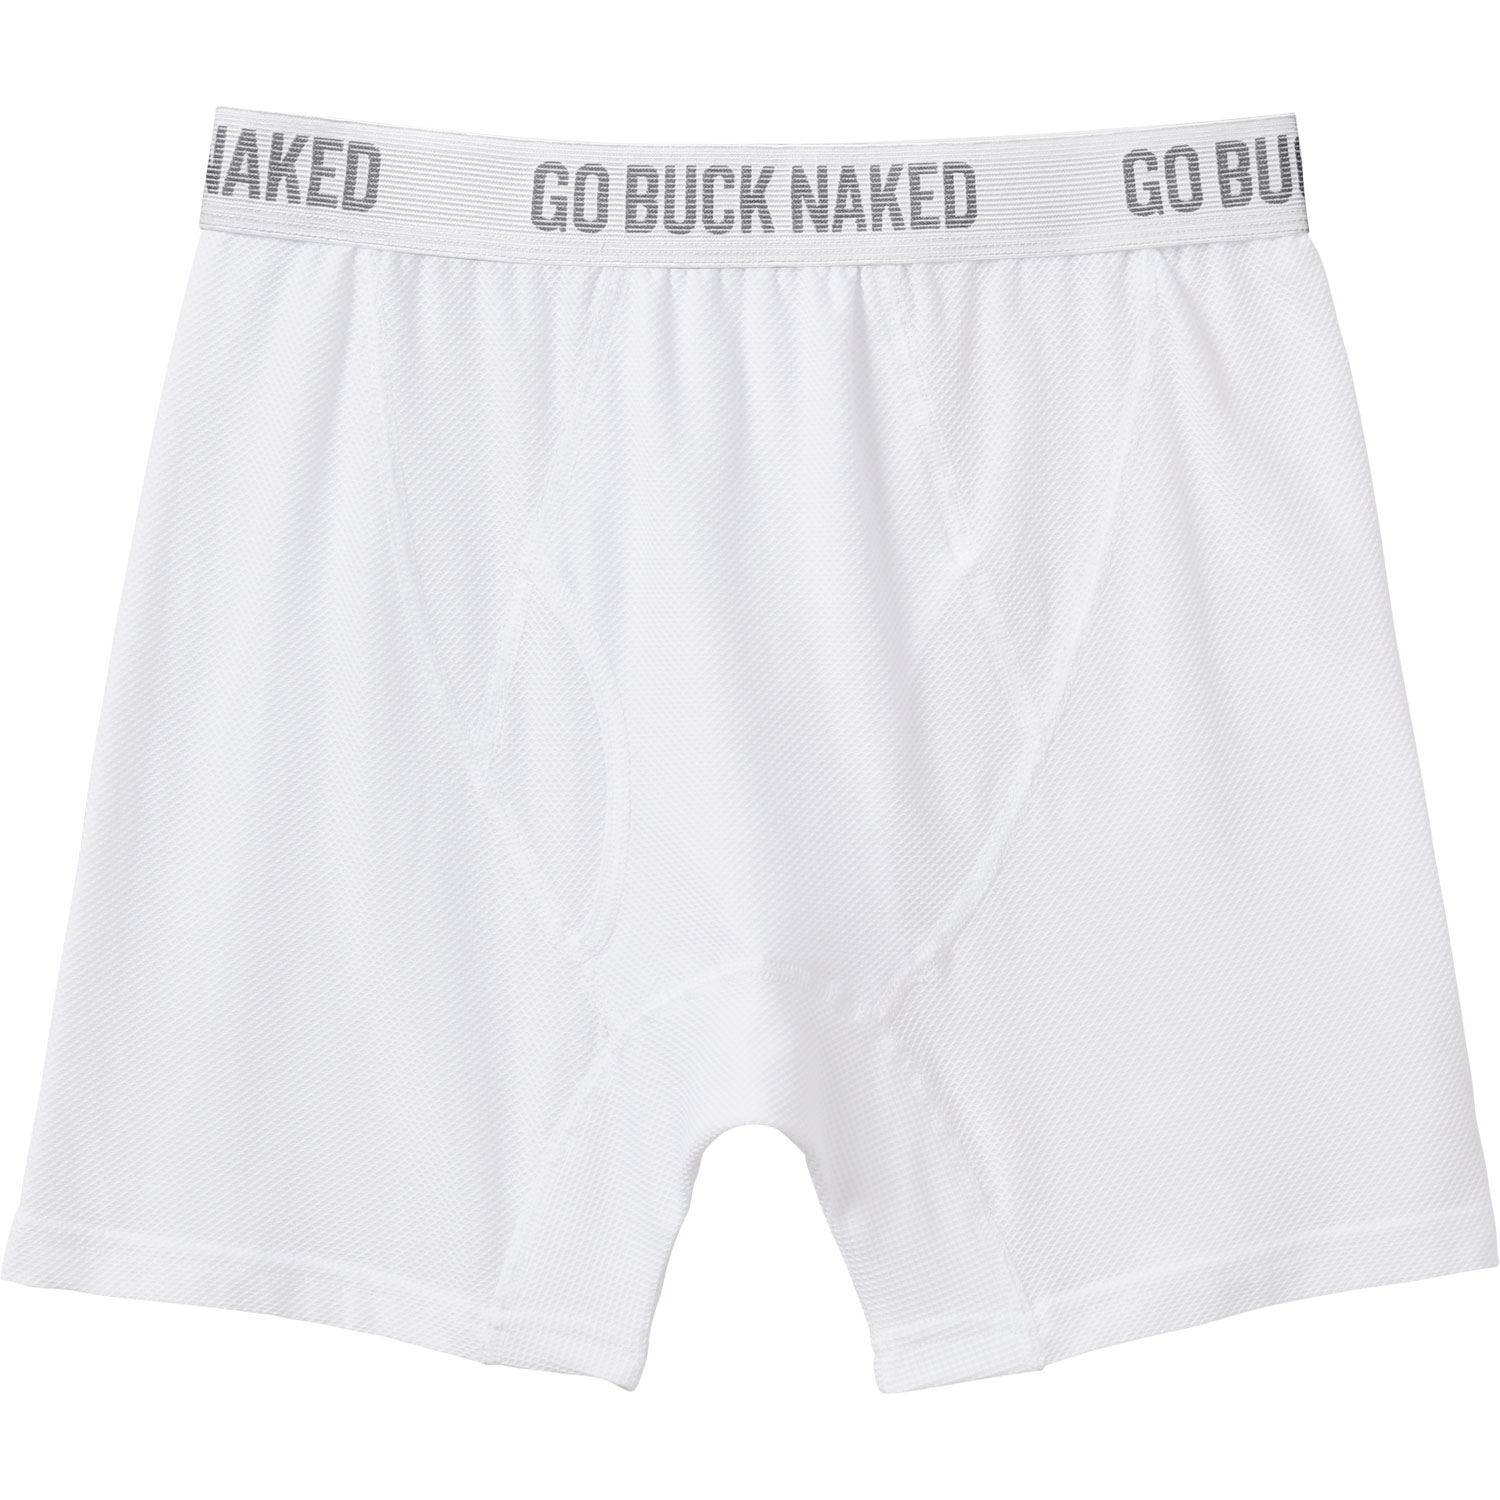 Mens Go Buck Naked Performance Boxer Briefs Duluth Trading Company